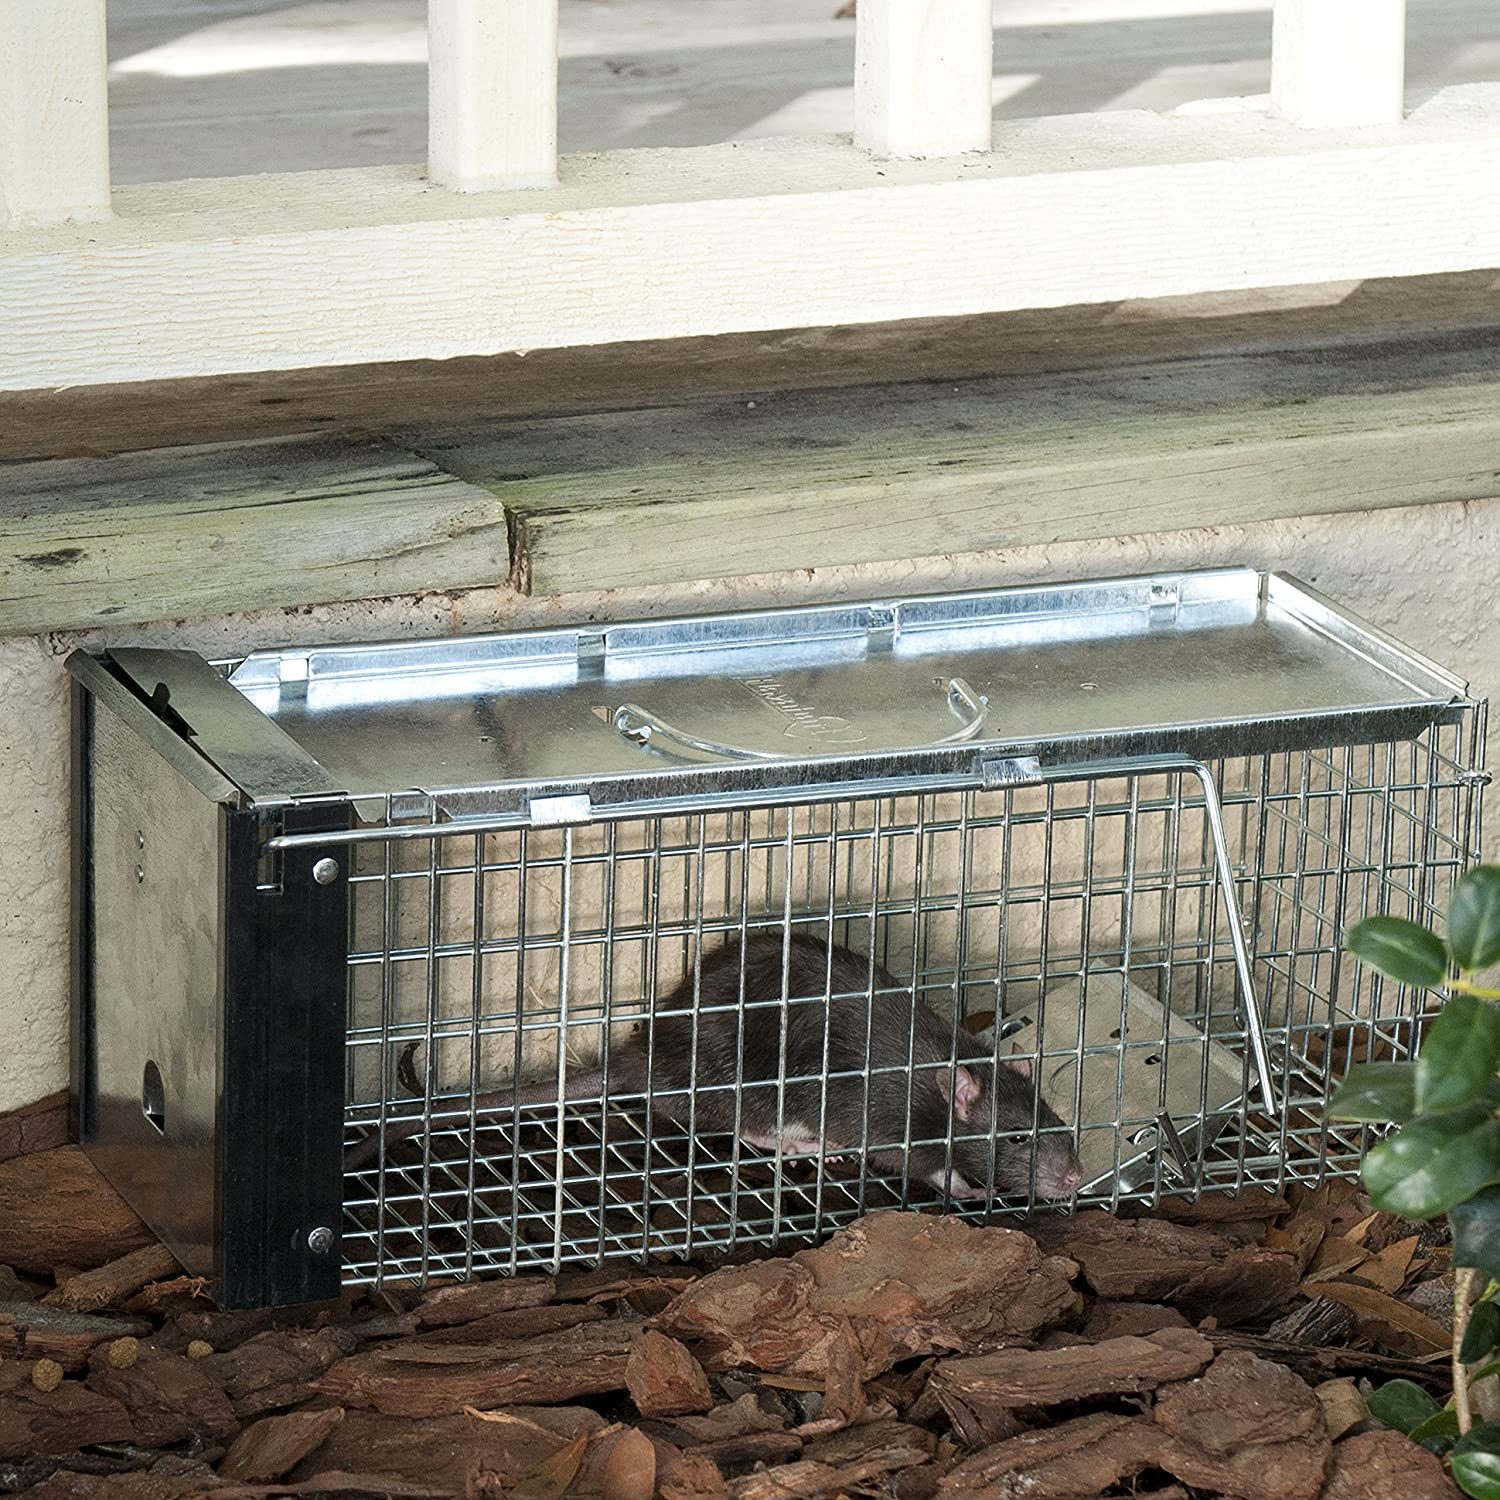 Top Picks for Rat Traps to Rid Your Indoor & Outdoor Space of Rodents